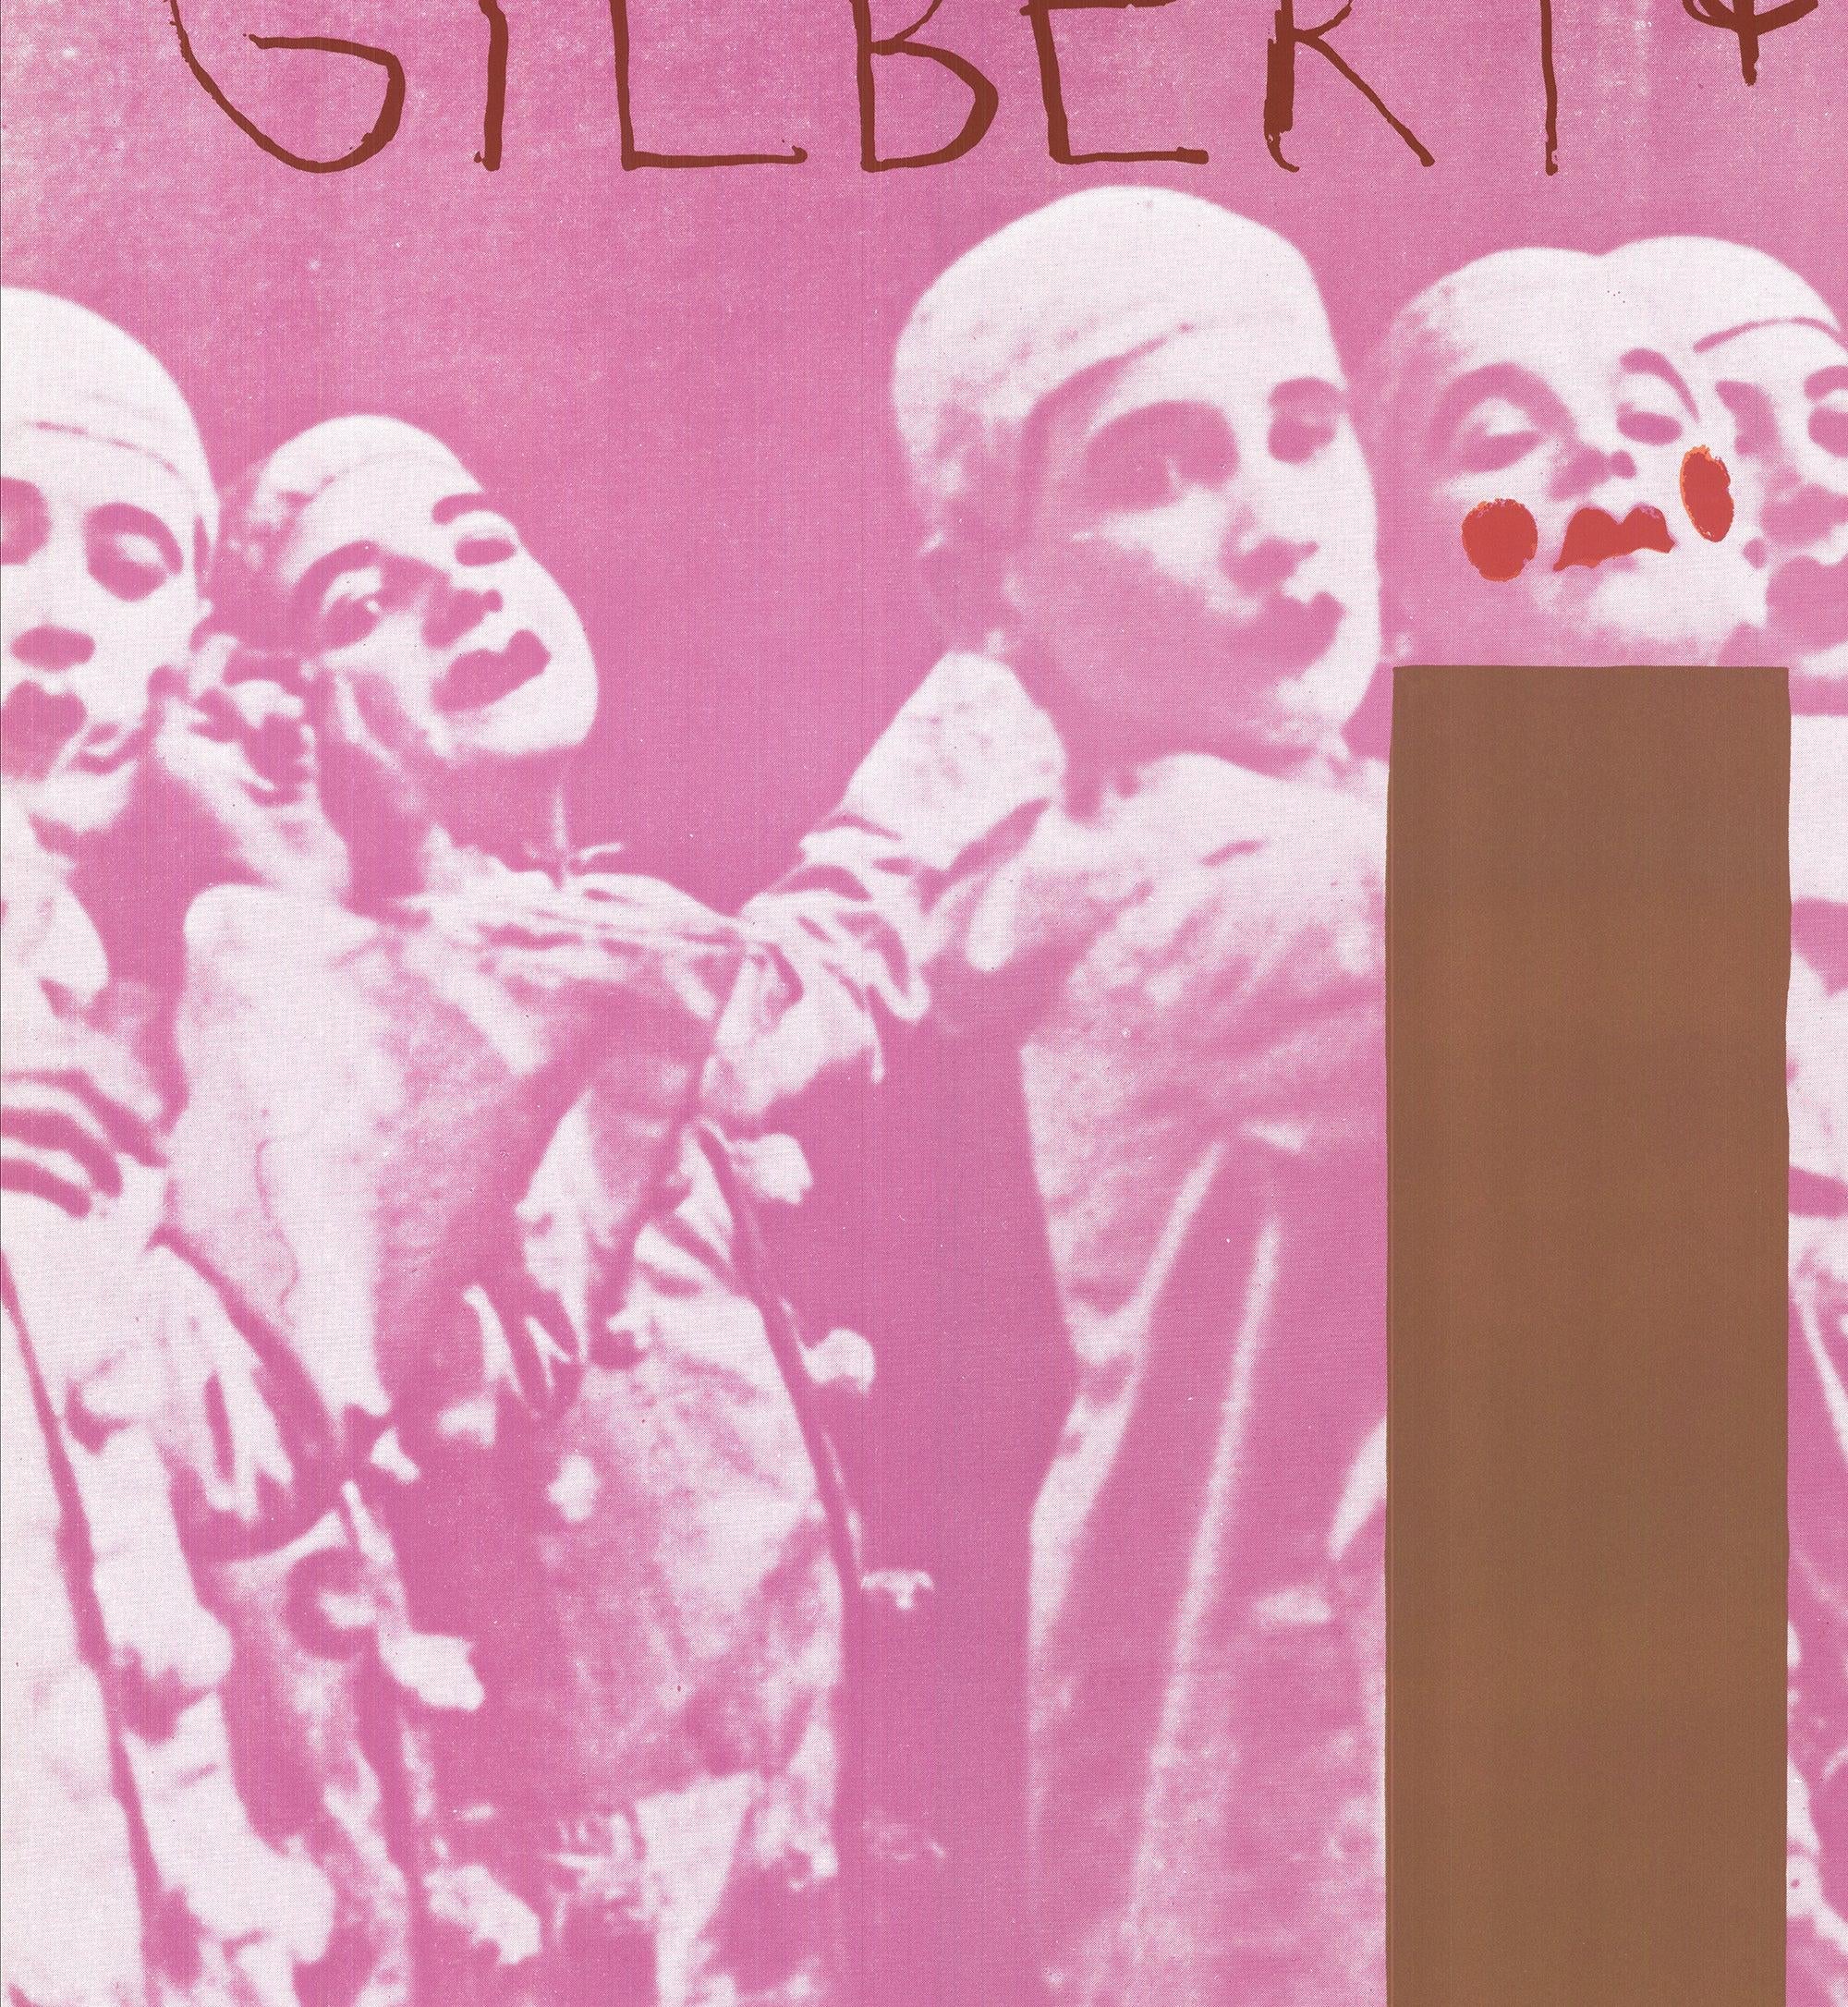 Promotional Poster by Jim Dine for Gilbert and Sullivan Production at New York City Center, 1968

This promotional poster, designed by Jim Dine, was created for a production of Gilbert and Sullivan at the New York City Center in 1968. The poster is